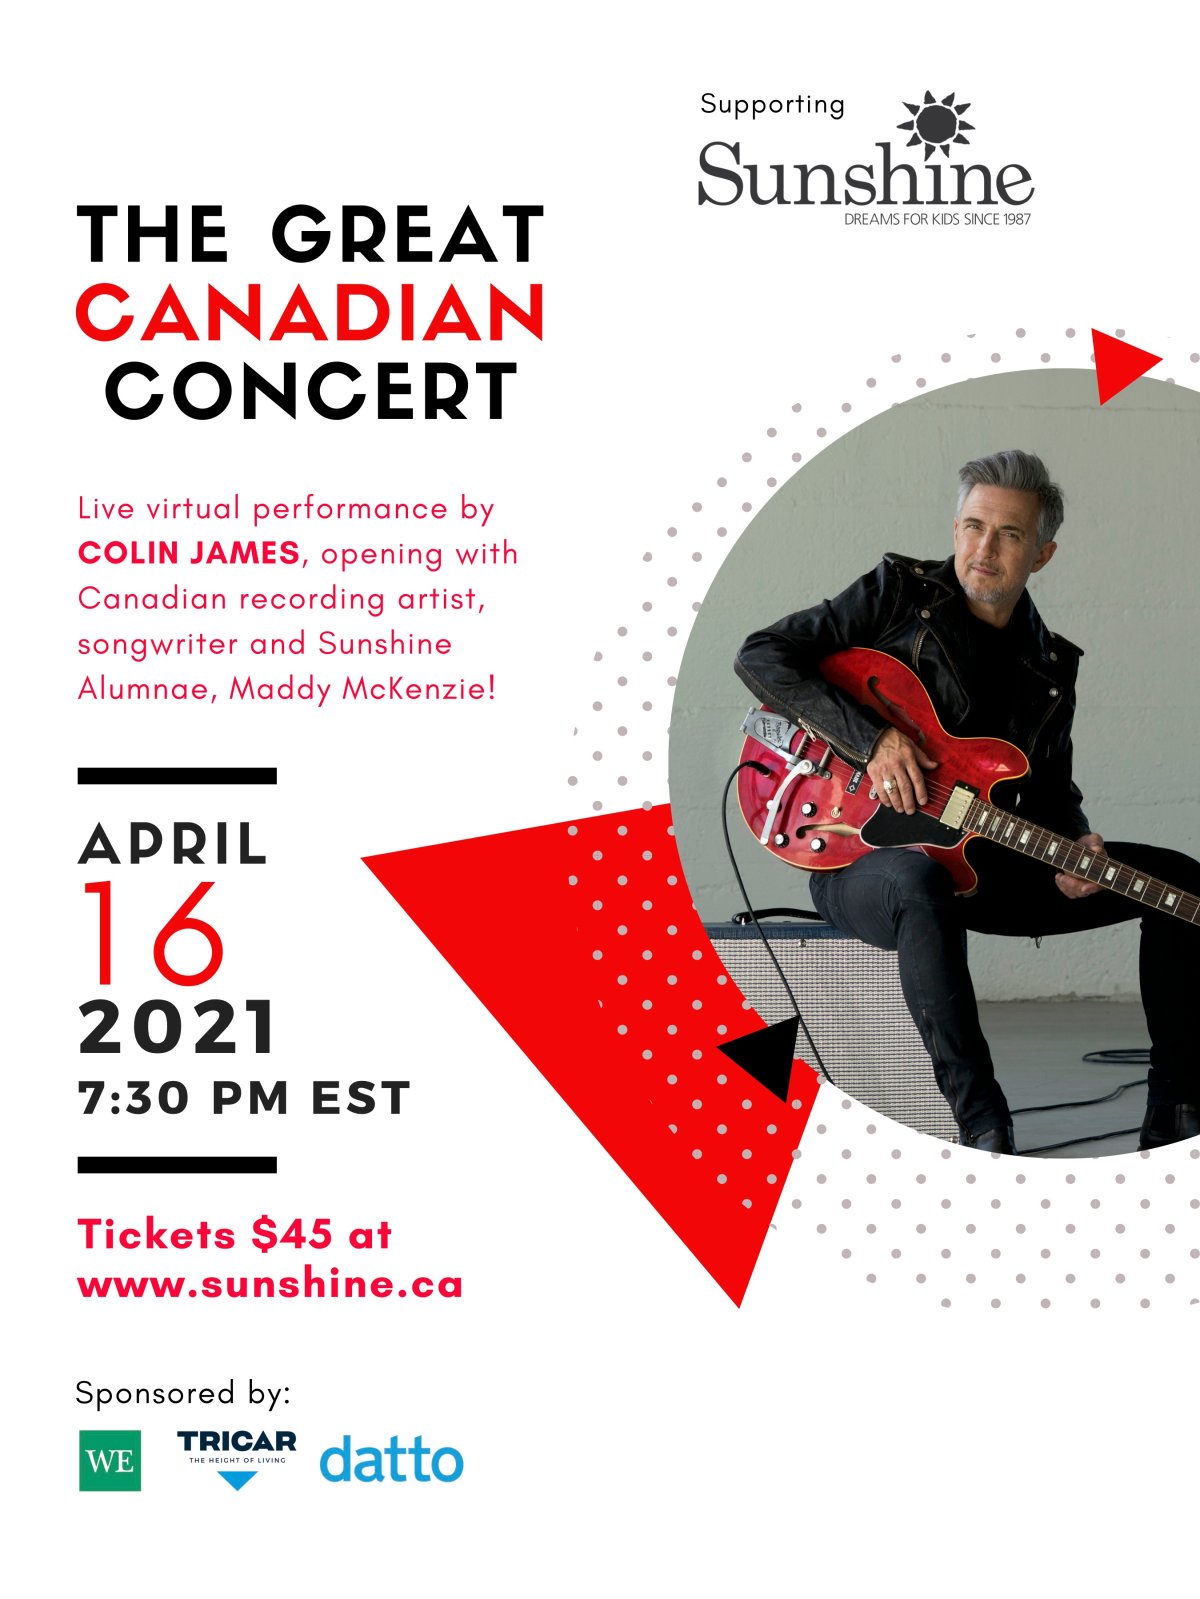 The Great Canadian Concert in support of the Sunshine Foundation - image